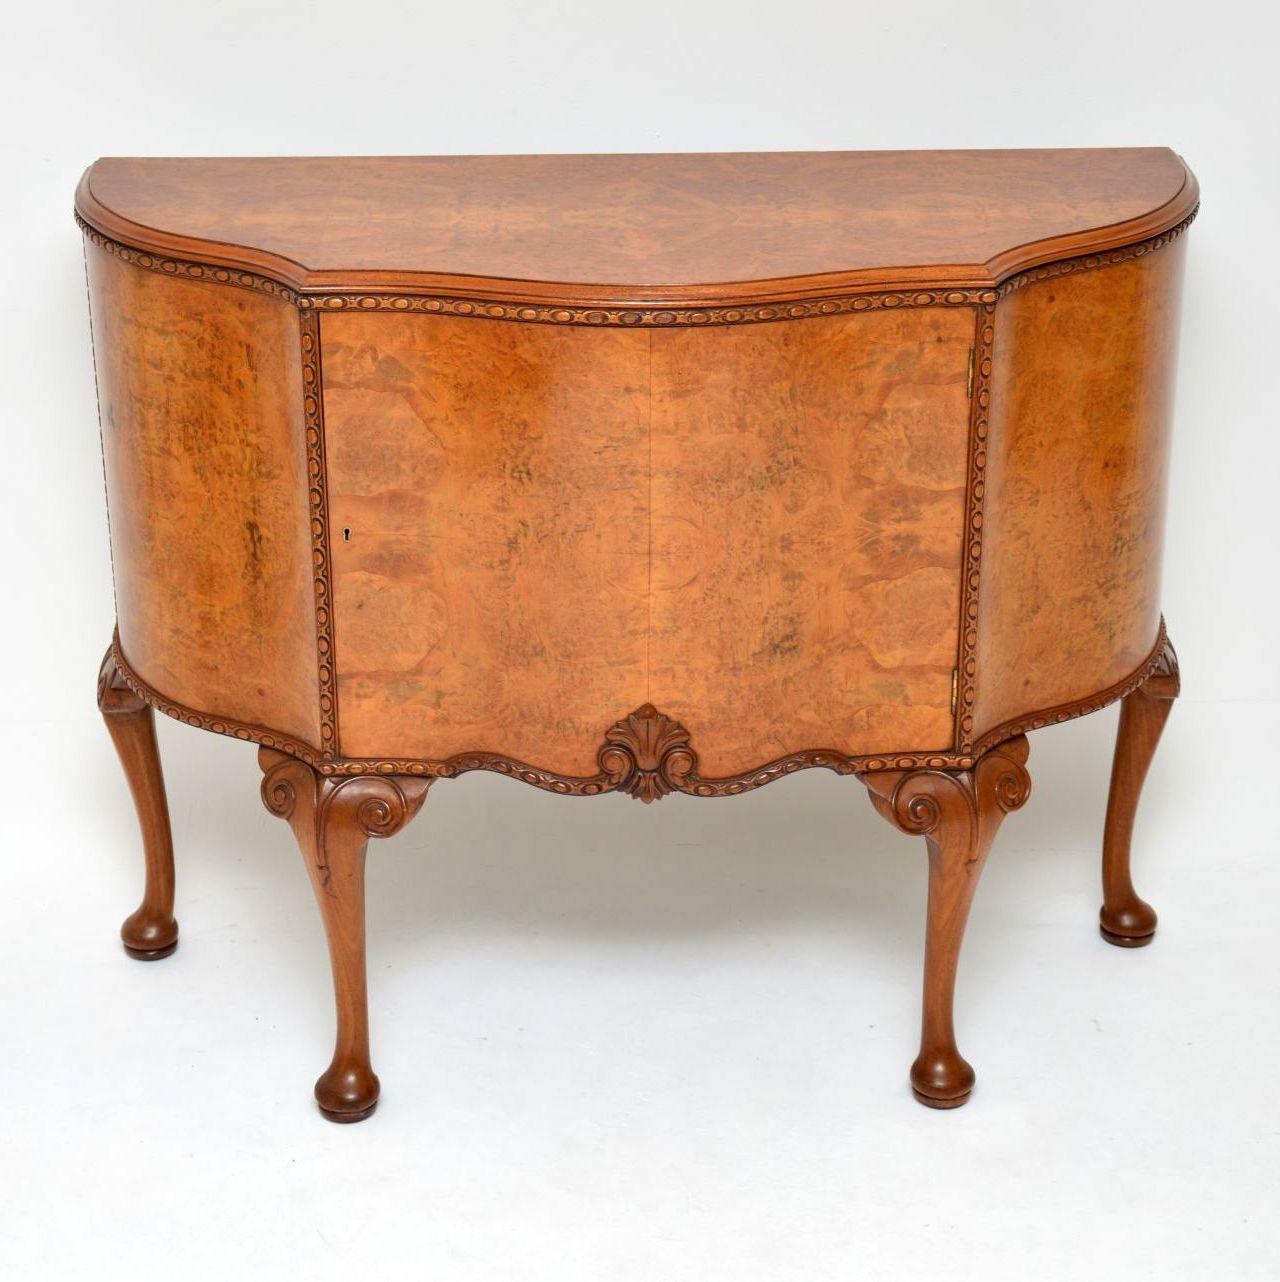 This antique Queen Anne style burr walnut cabinet has a wonderful warm mellow colour & is in excellent condition, dating from the 1920s period. It has a serpentine shaped front with a single door cupboard & lots of storage inside. The top and the